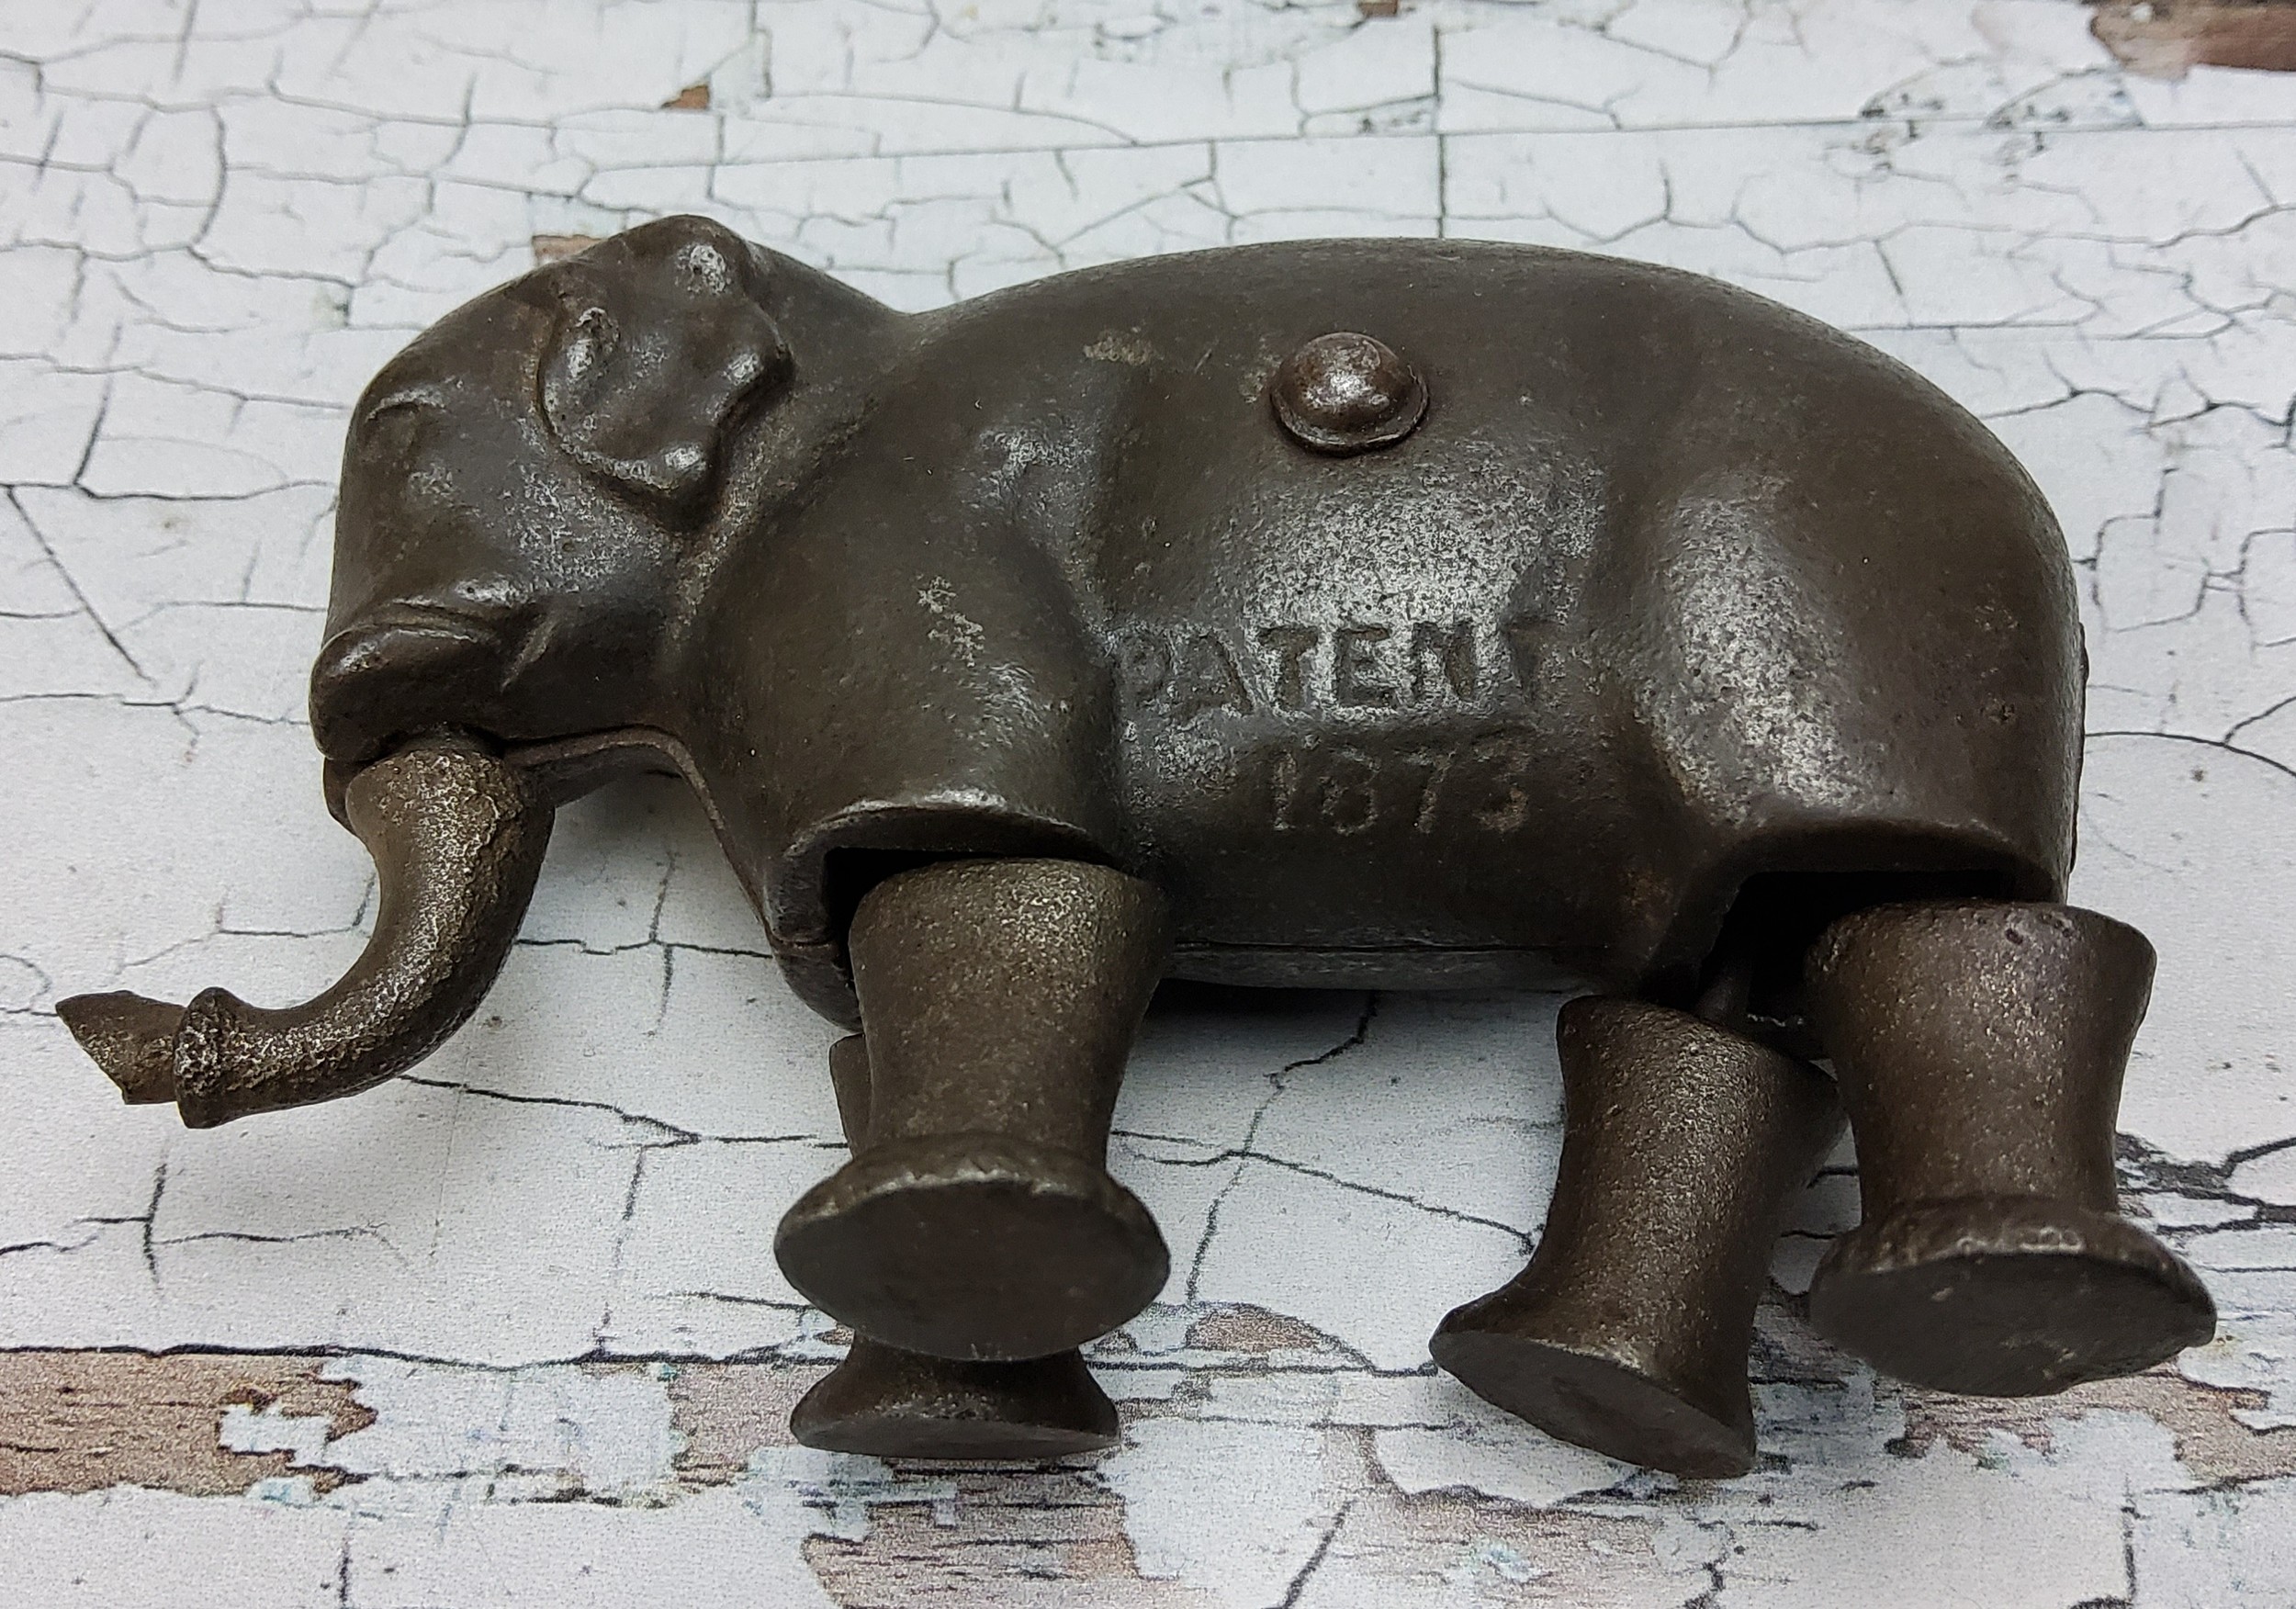 Late 19th Century Ives Toy Company, Bridgeport, Conneticut, cast iron ramp walking elephant toy, - Image 2 of 3